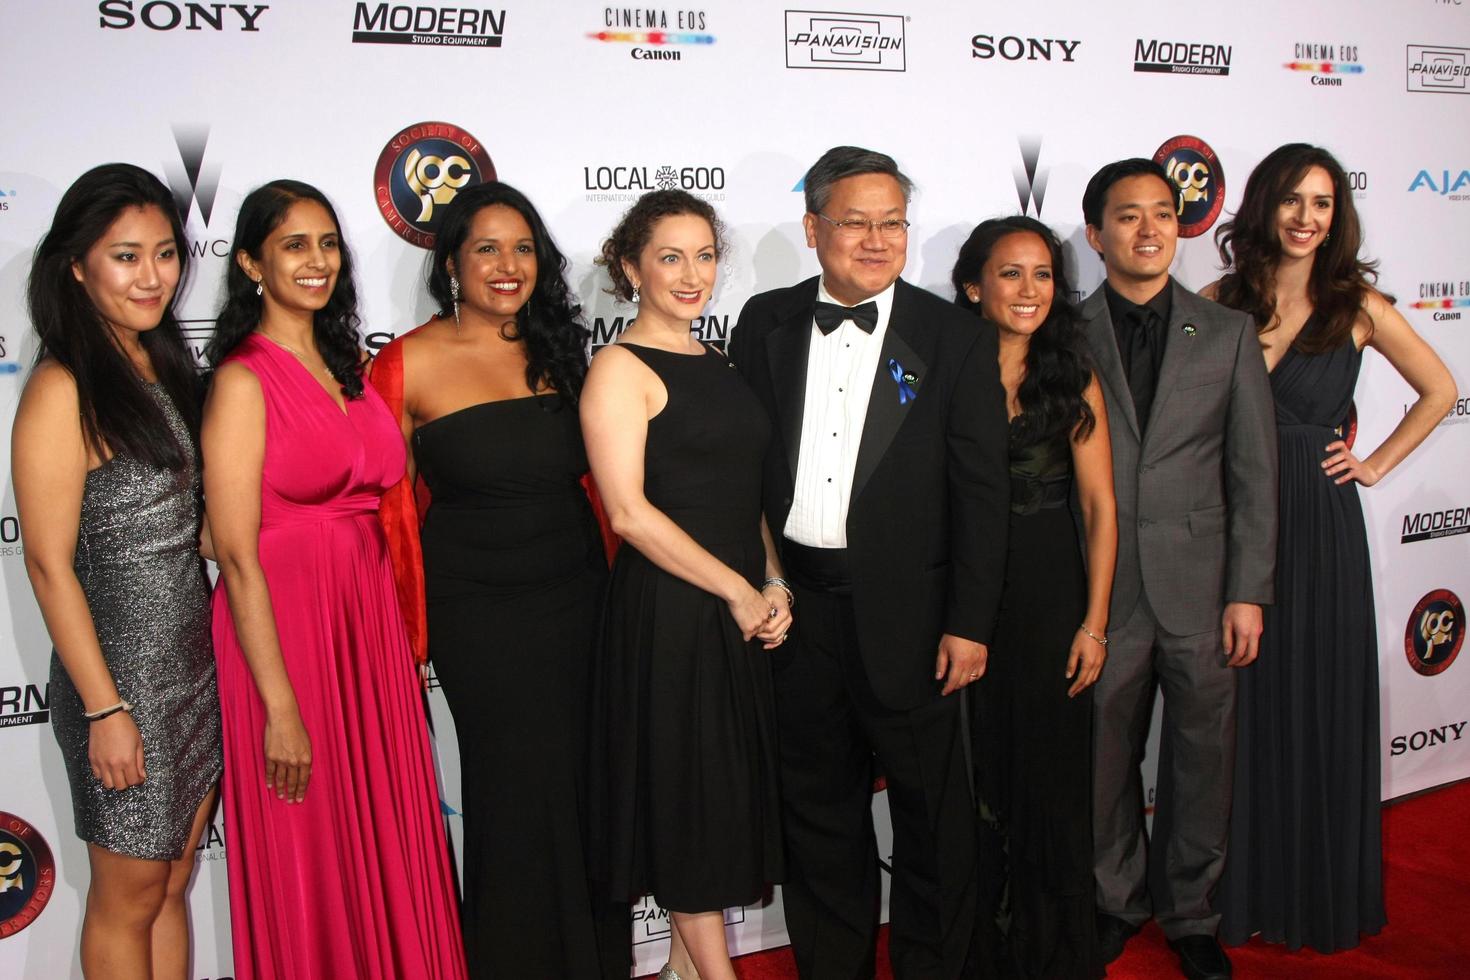 LOS ANGELES, FEB 8 - Children s Hospital of Los Angeles Staff at the 2015 Society Of Camera Operators Lifetime Achievement Awards at a Paramount Theater on February 8, 2015 in Los Angeles, CA photo